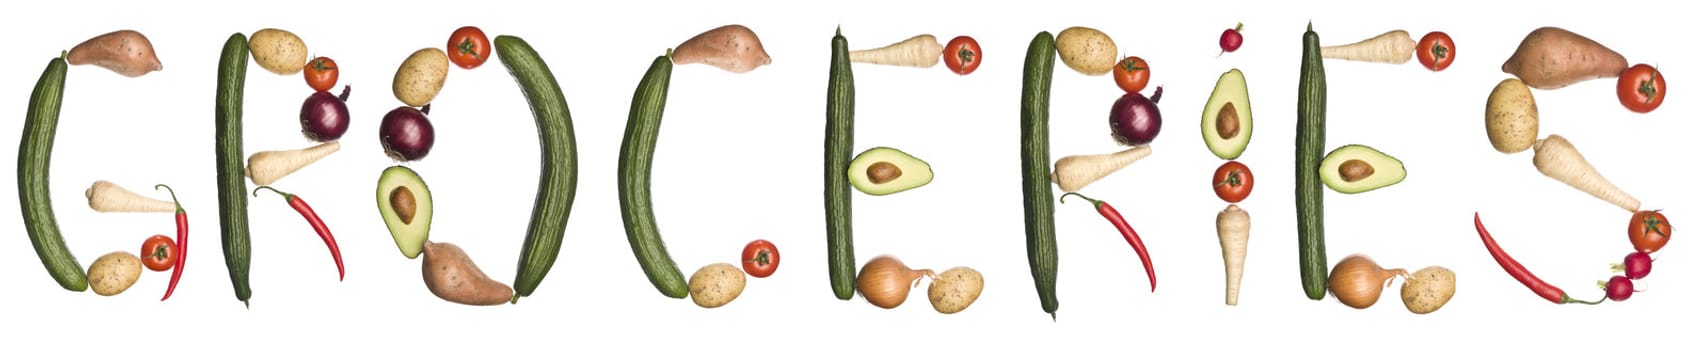 The word 'Groceries' made out of vegetables isolated on a white background